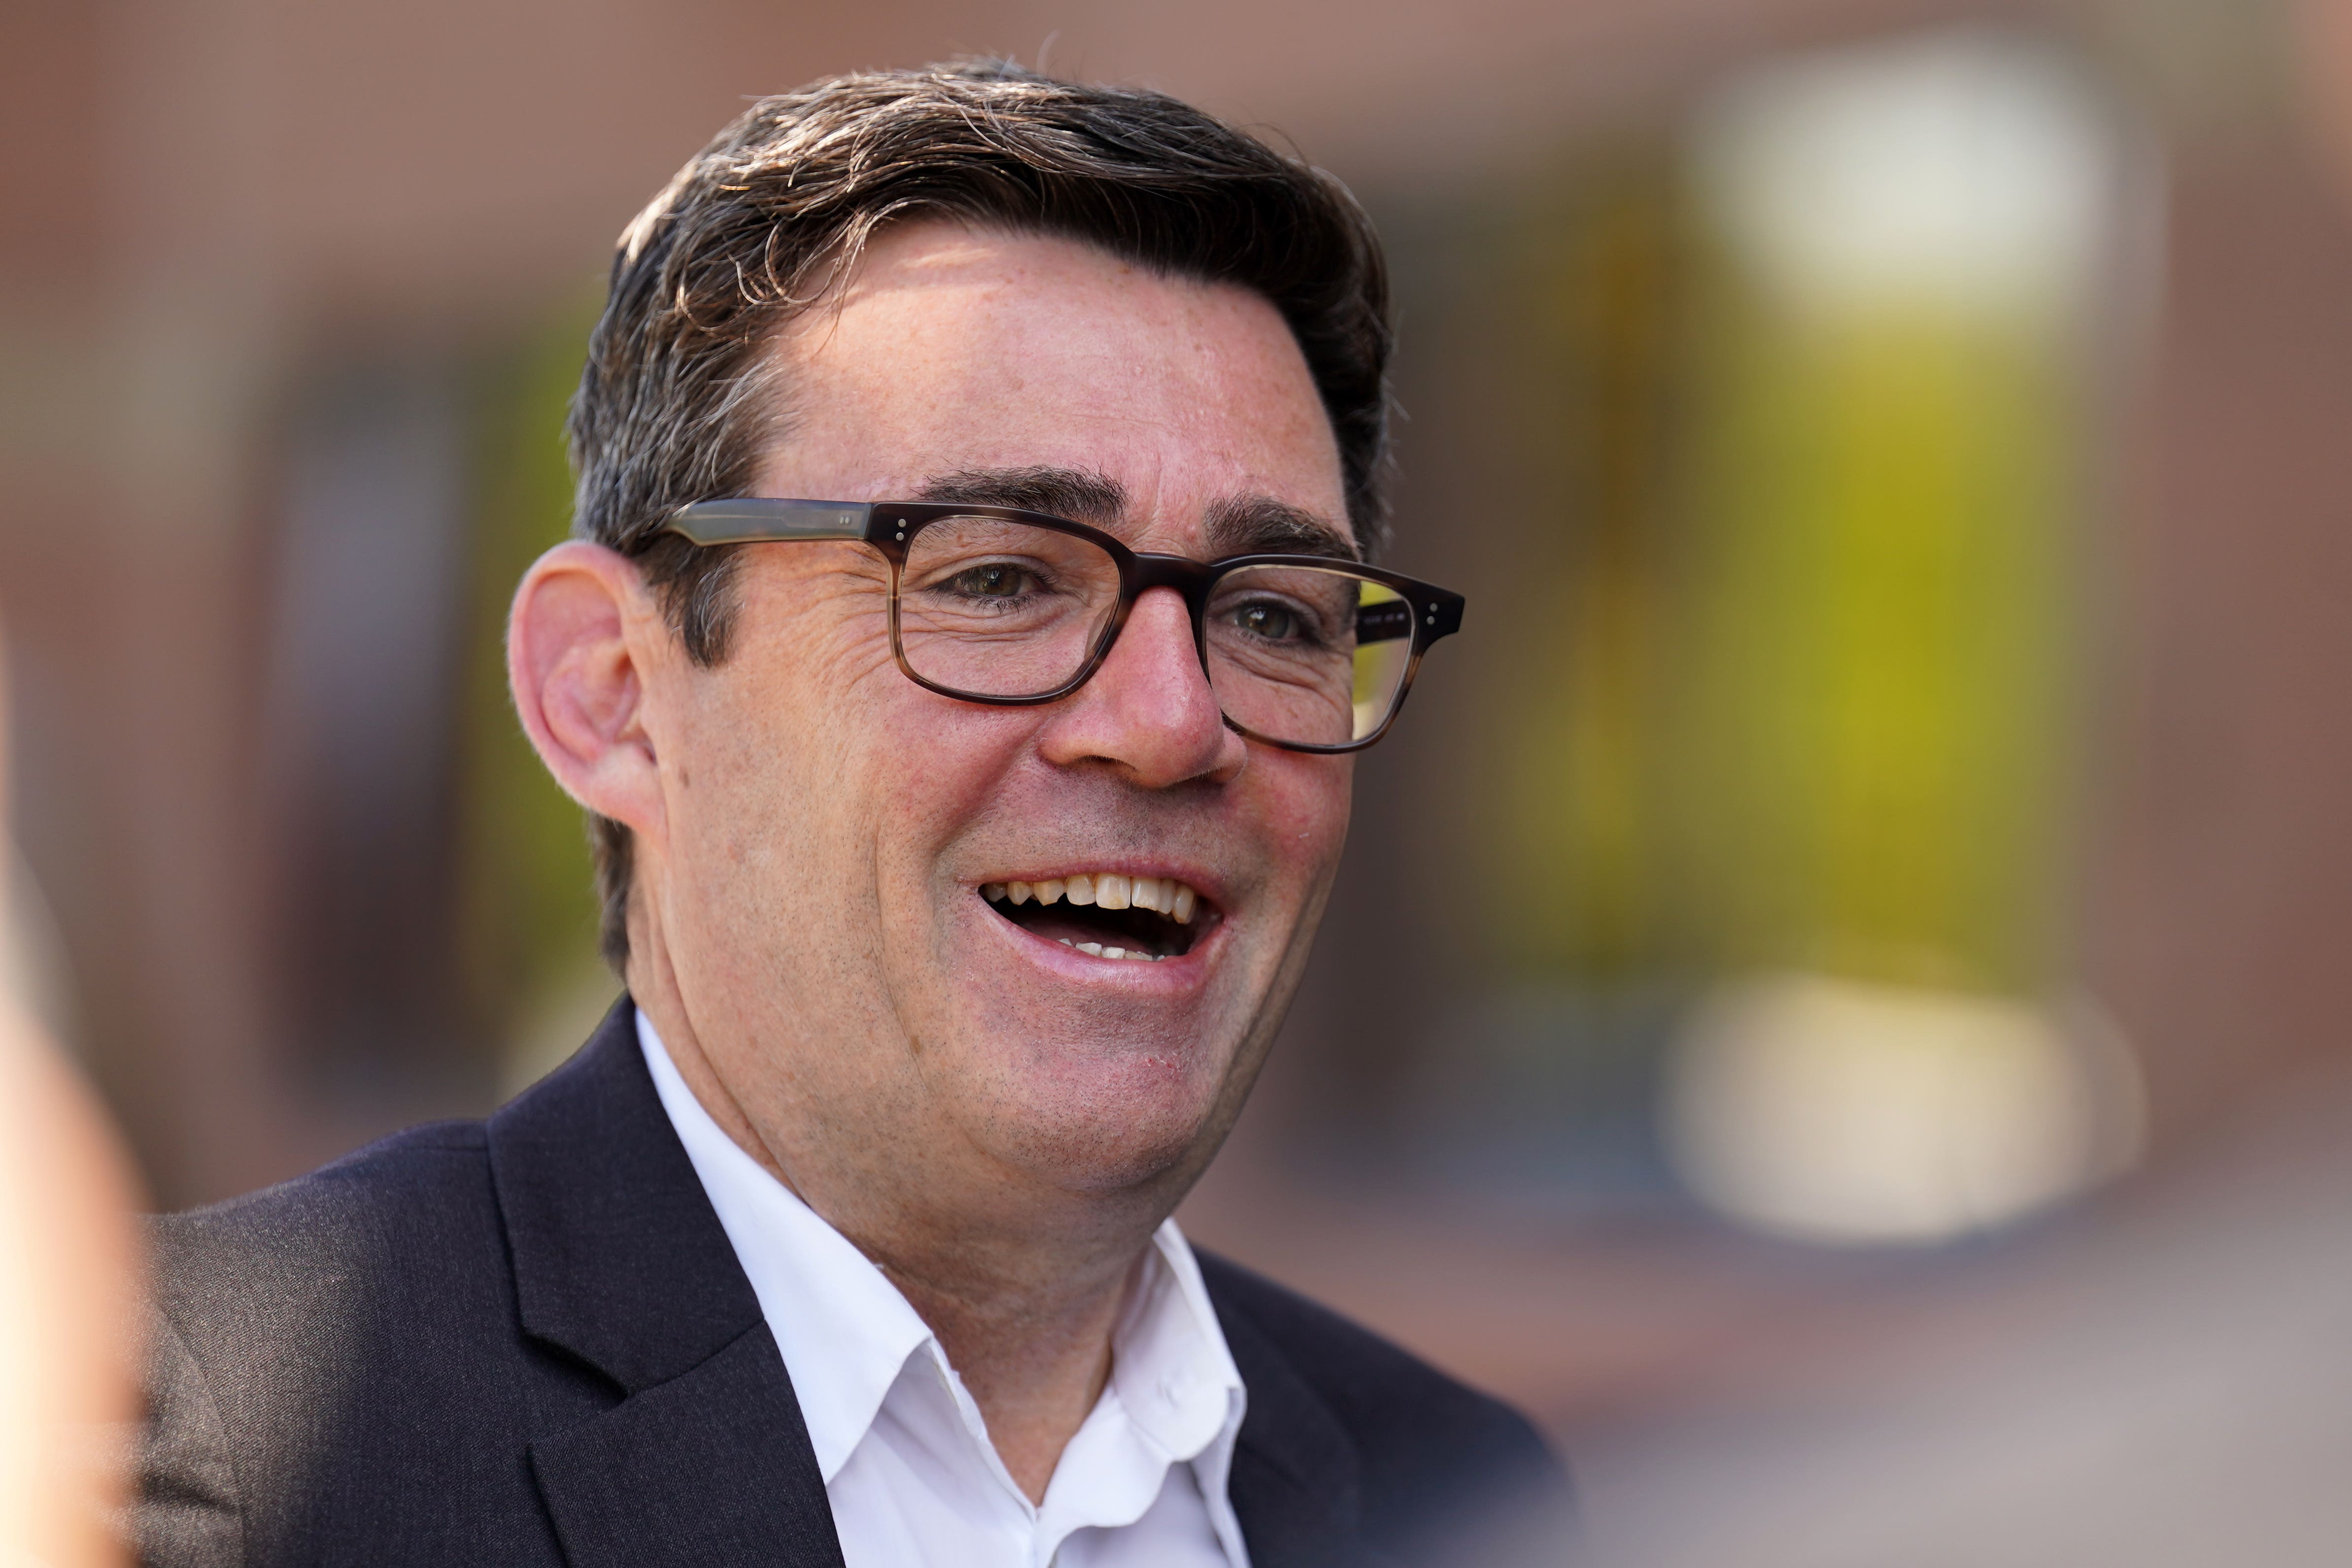 Privately-funded alternatives to a scrapped section of HS2 have been discussed by Greater Manchester mayor Andy Burnham and Transport Secretary Mark Harper